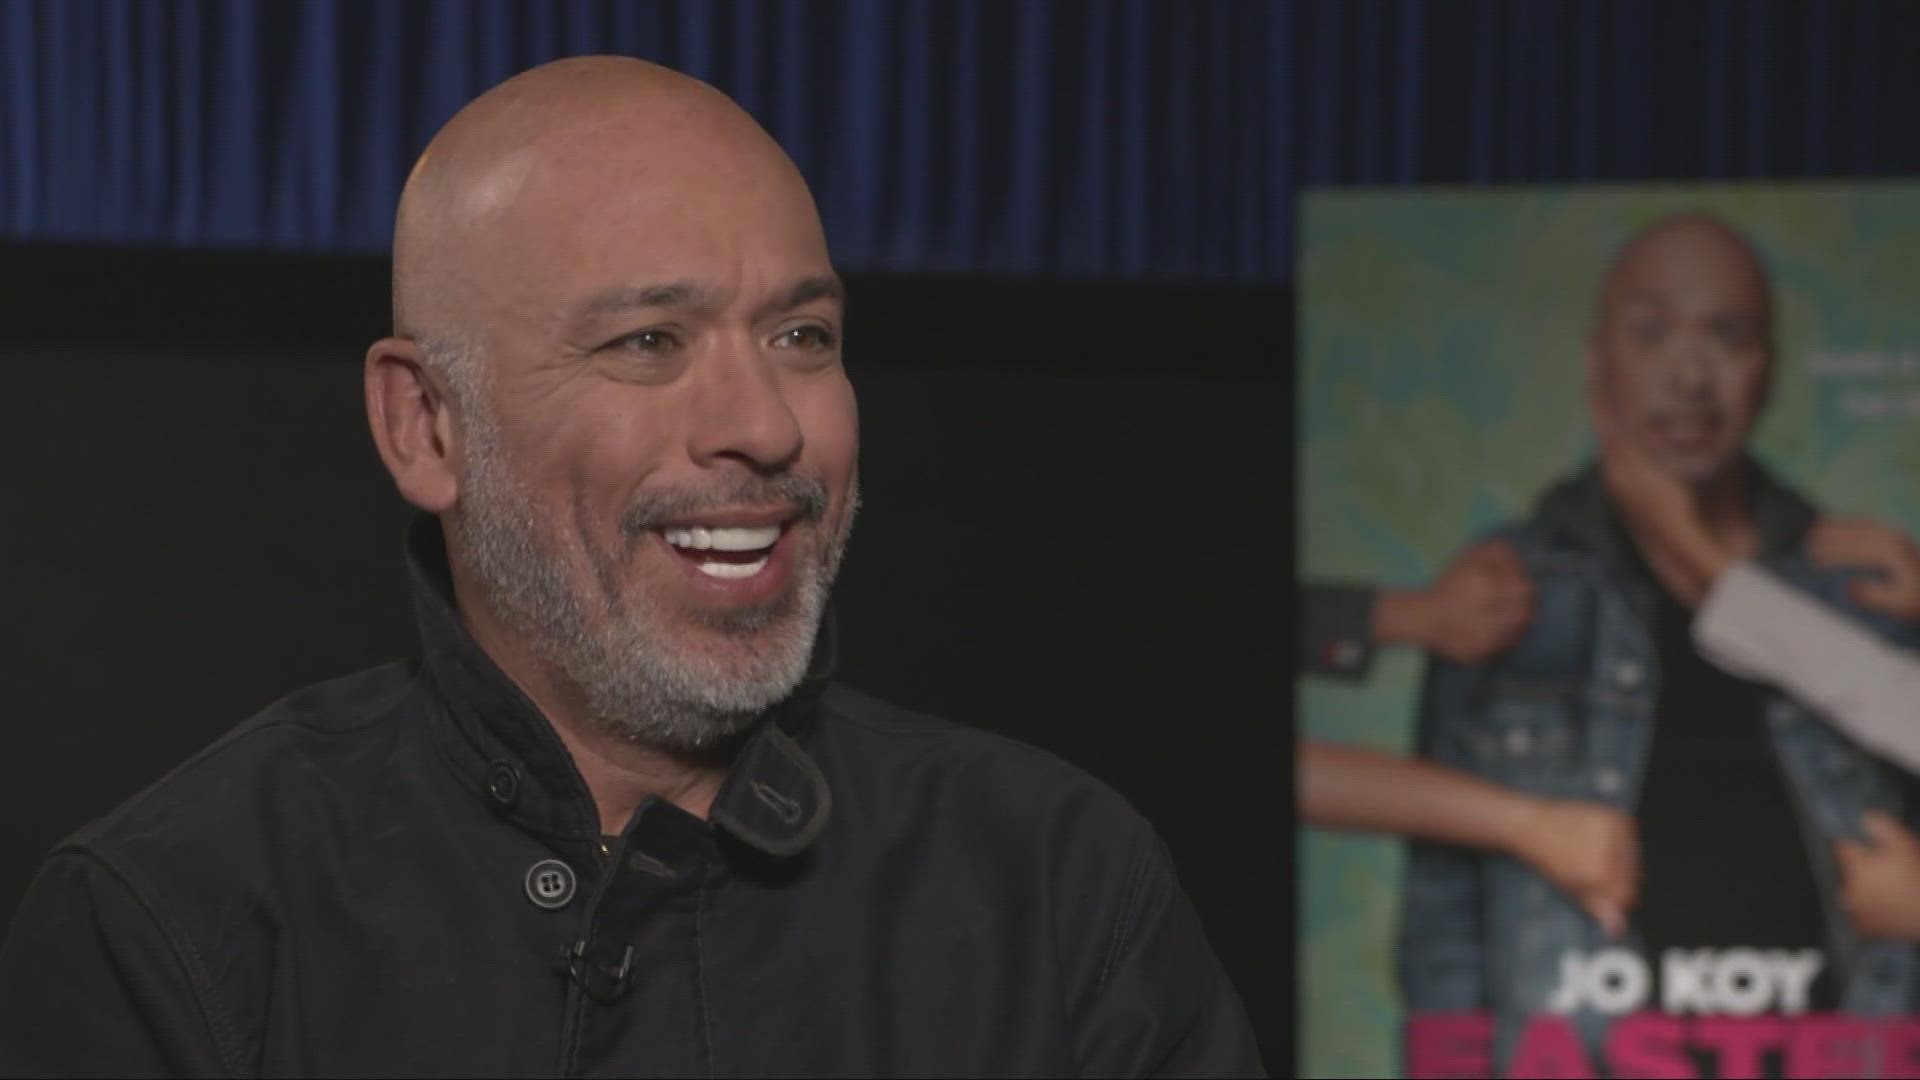 Jo Koy received the key to Daly City before his movie "Easter Sunday" came out in theaters.